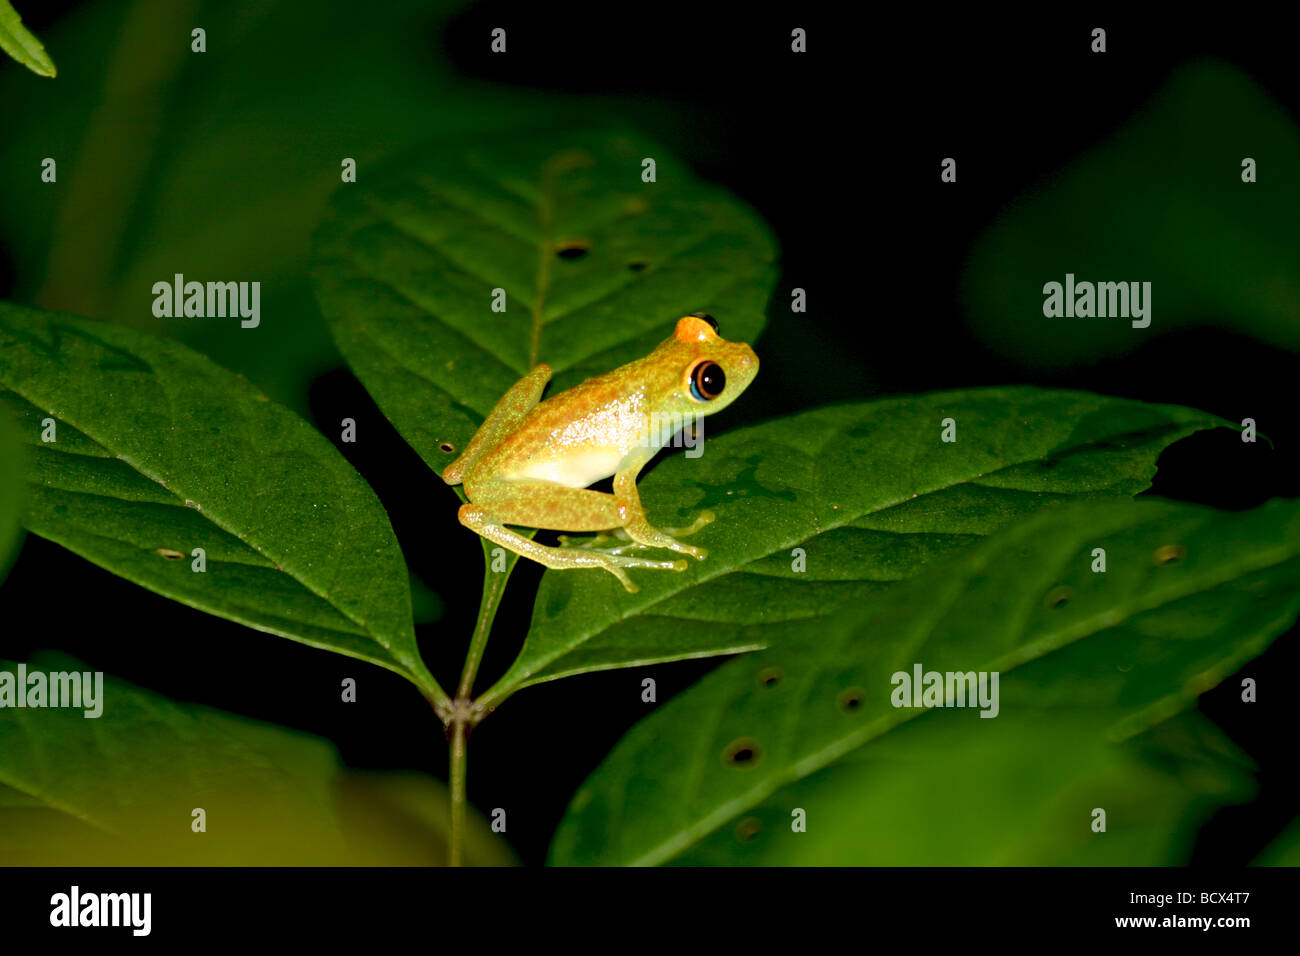 A treefrog in the rainforests of Madagascar Stock Photo